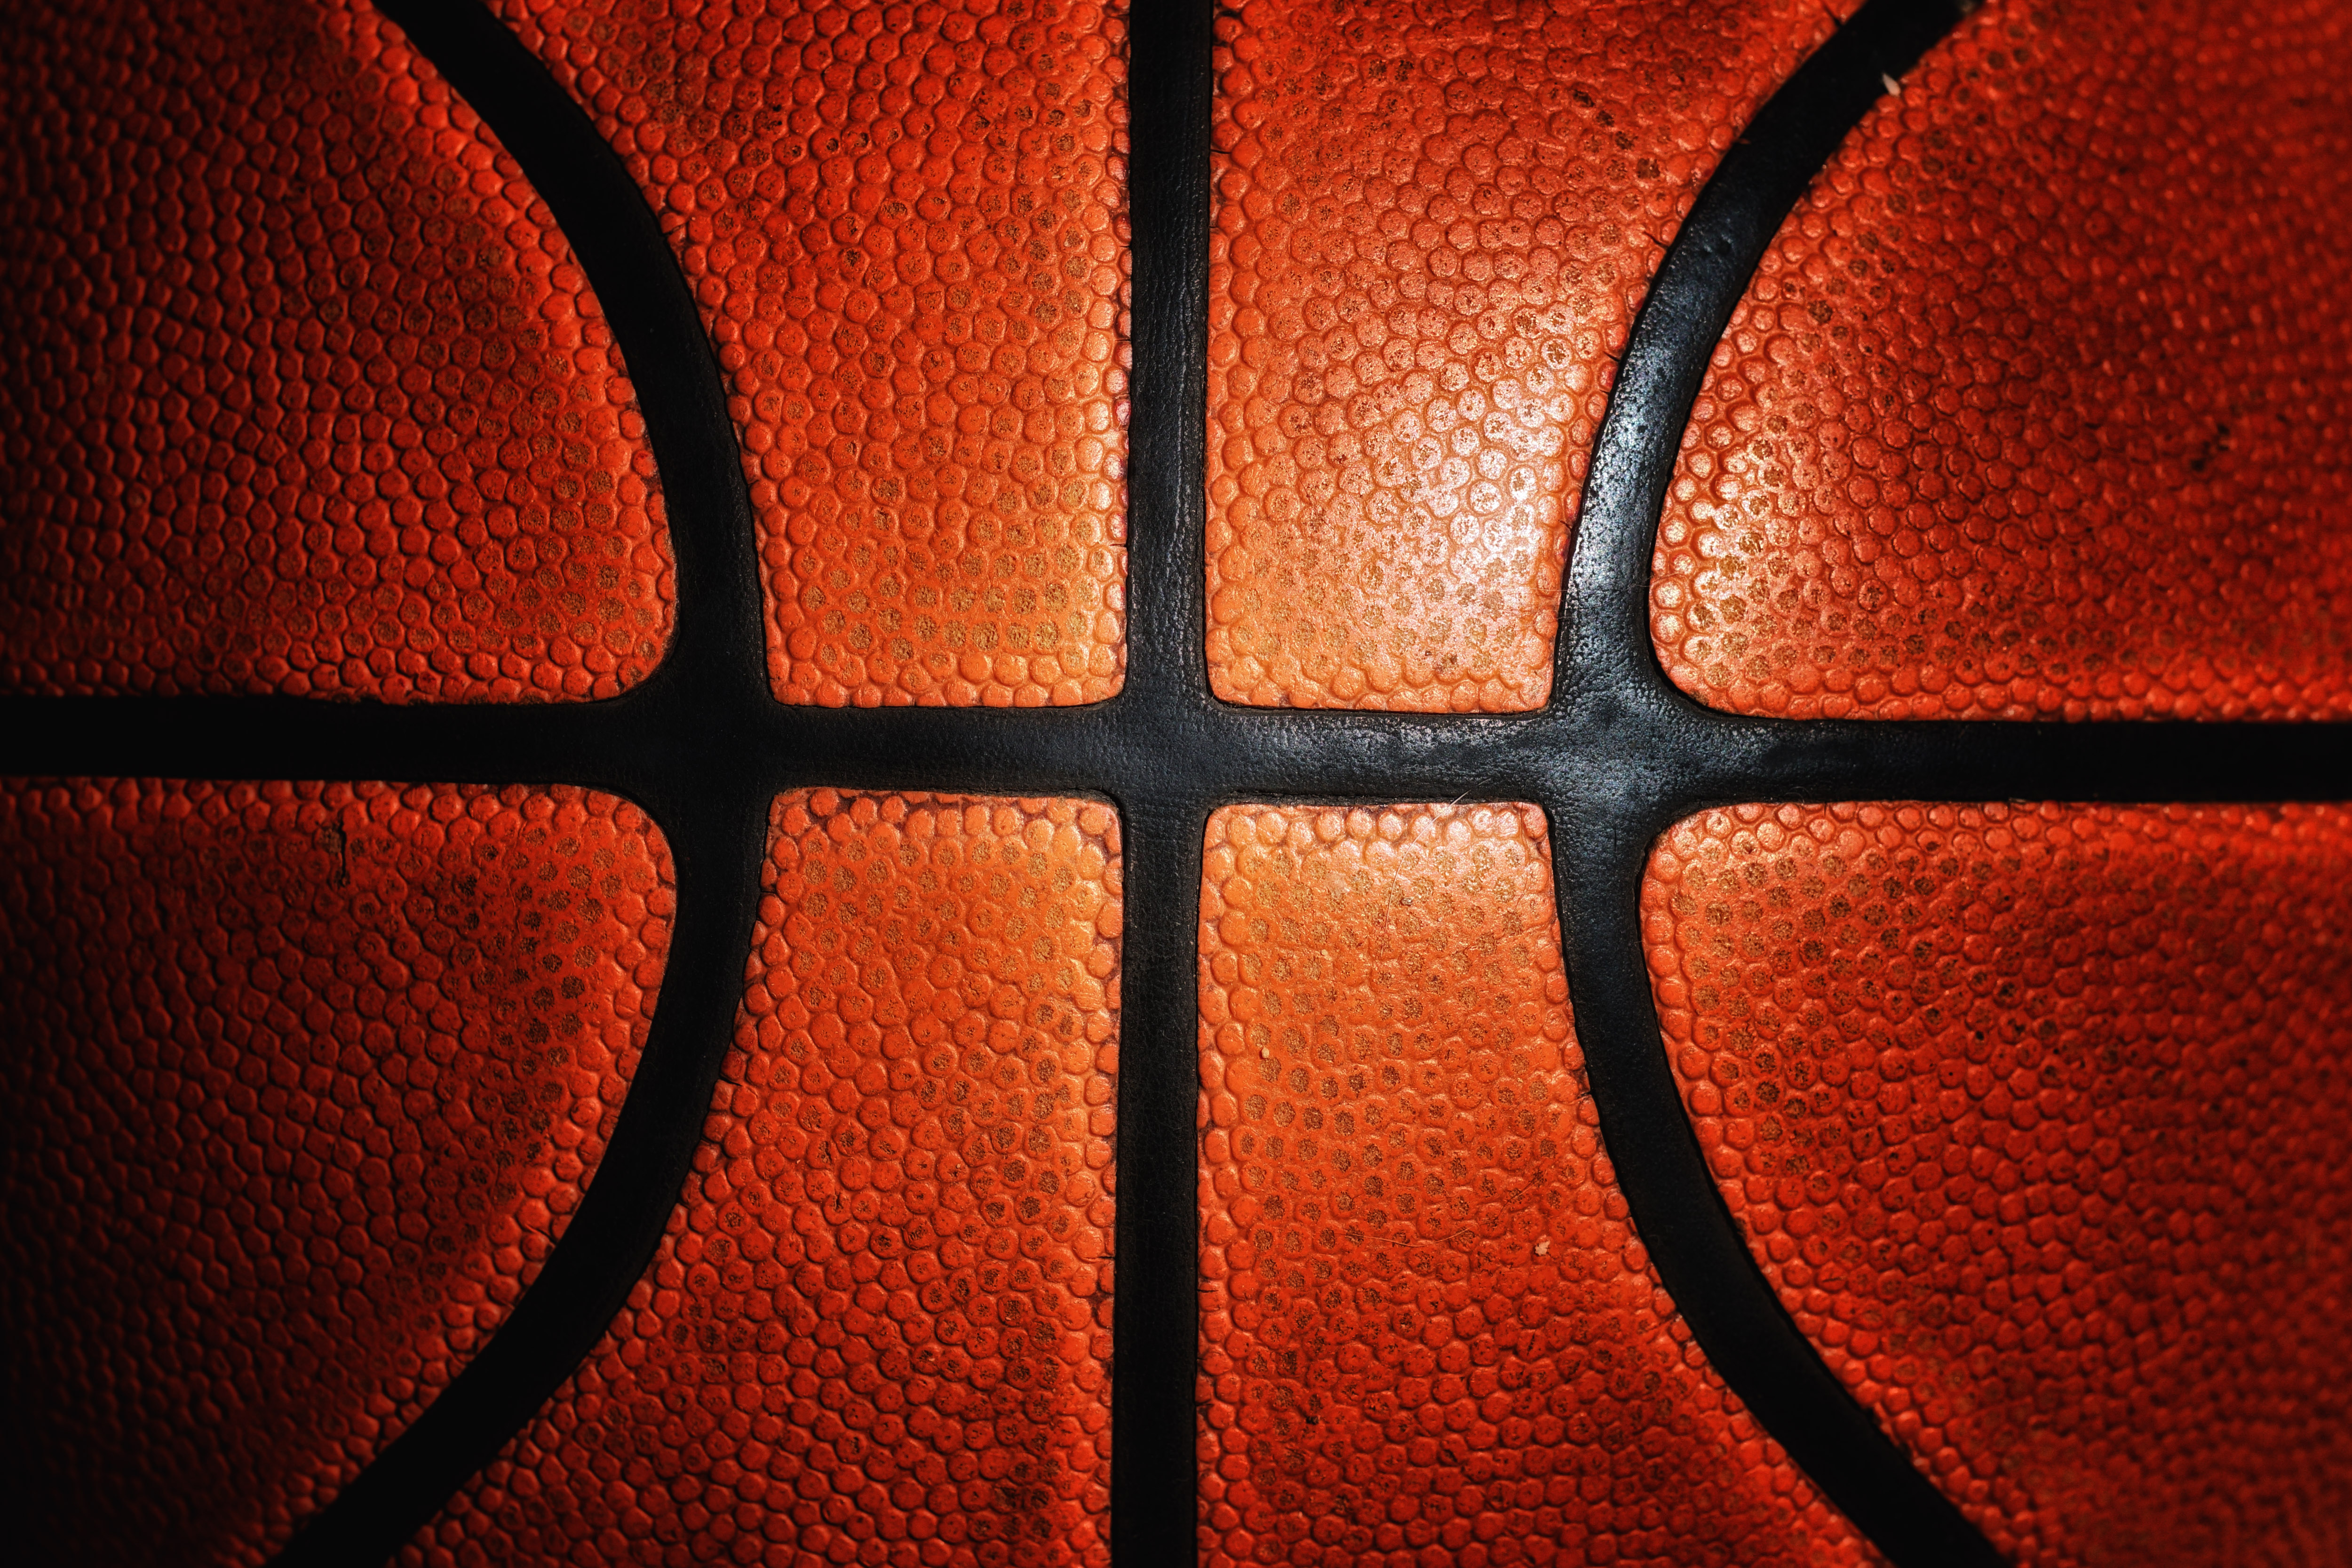 Dark and edgy old basketball texture background image ...